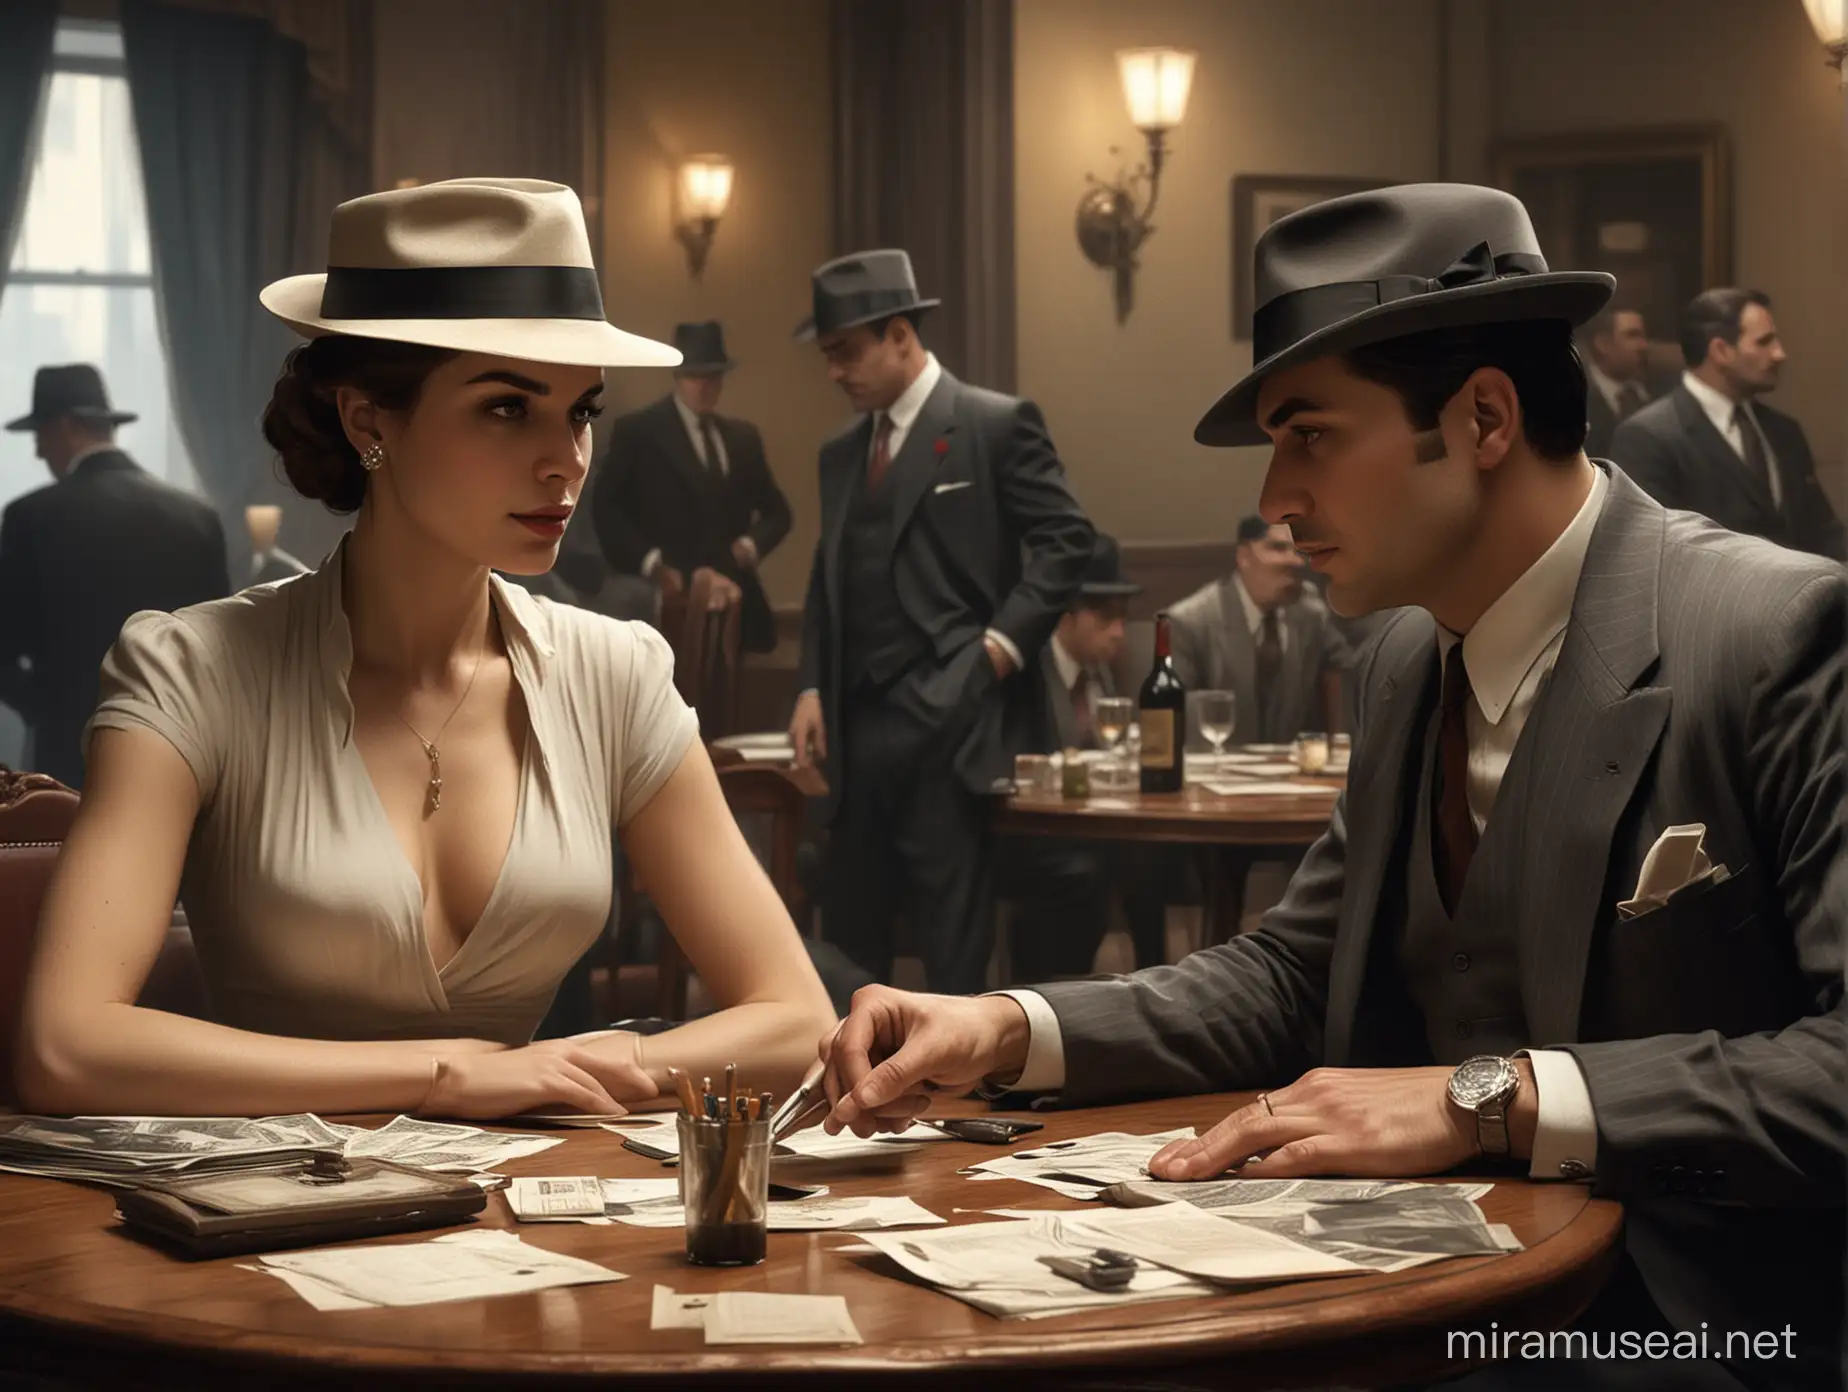 concept art  10 man and elegant woman play in real life at a table, split into citizens, cops, don boss and mafia. The art should be in al capone style.